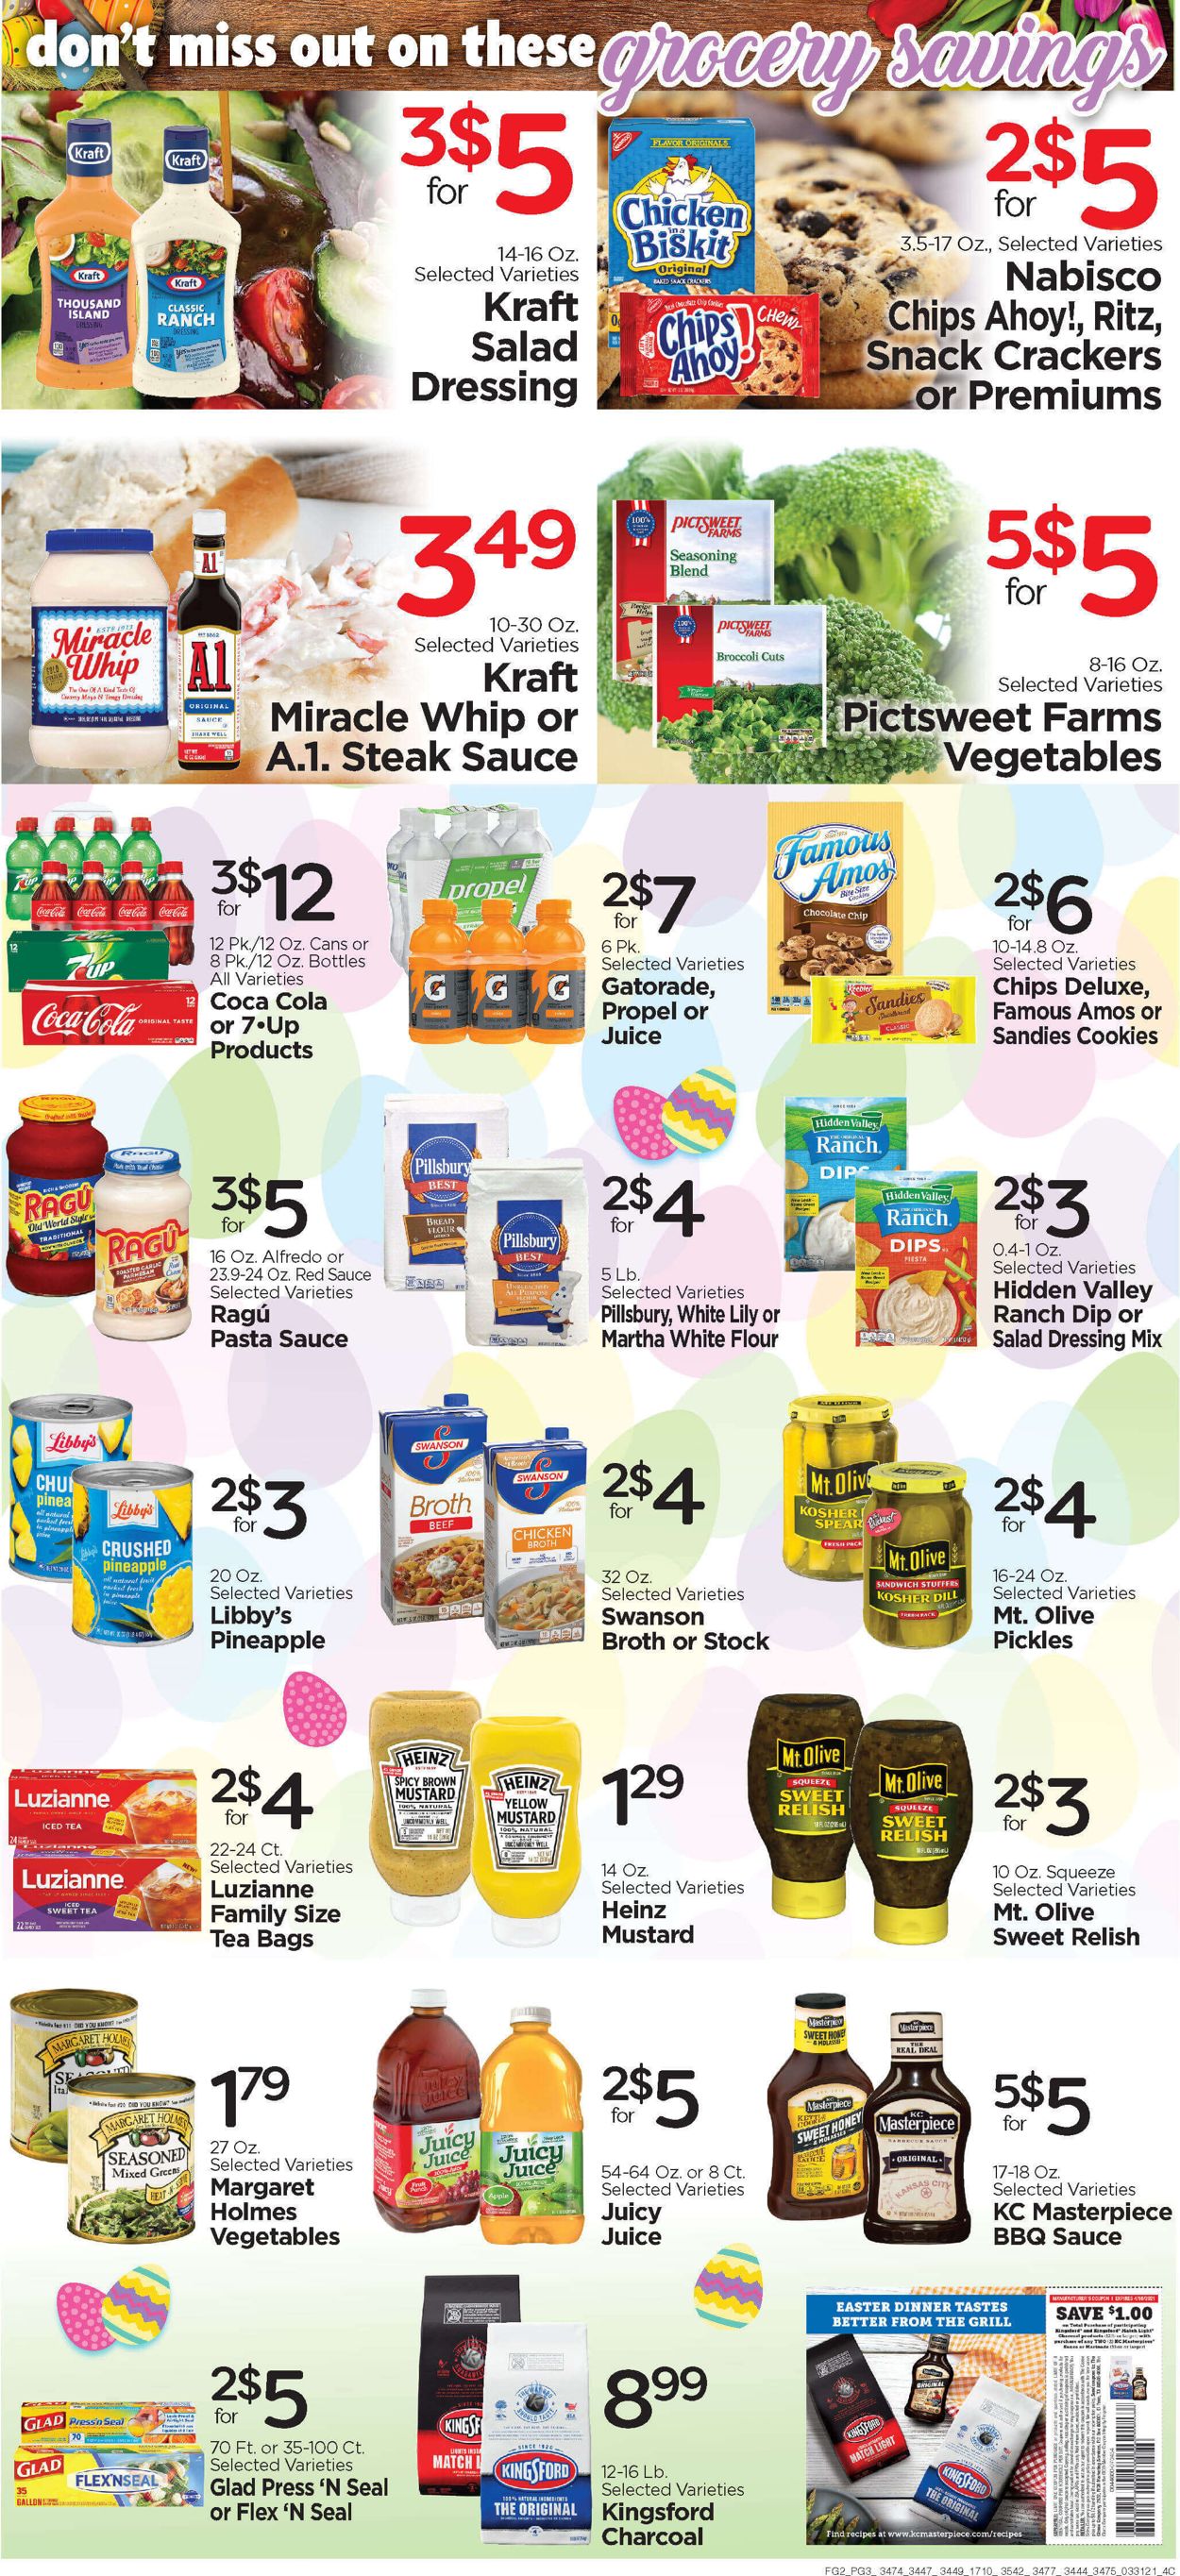 Edwards Food Giant Easter 2021 ad Weekly Ad Circular - valid 03/31-04/06/2021 (Page 3)